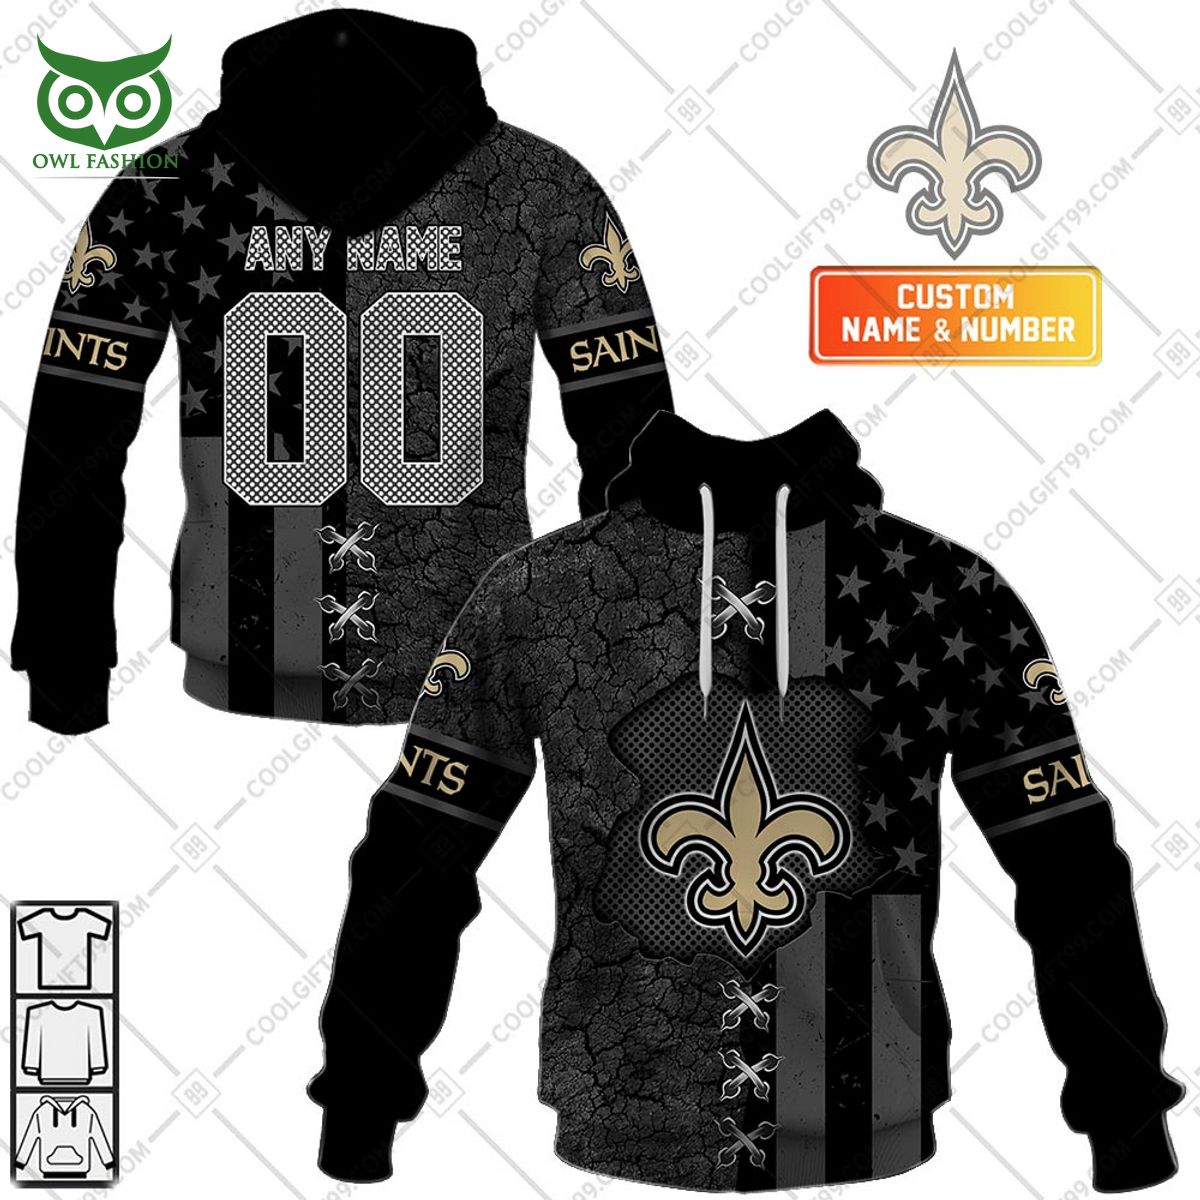 New Orleans Saints NFL Personalized hoodie shirt printed Cuteness overloaded